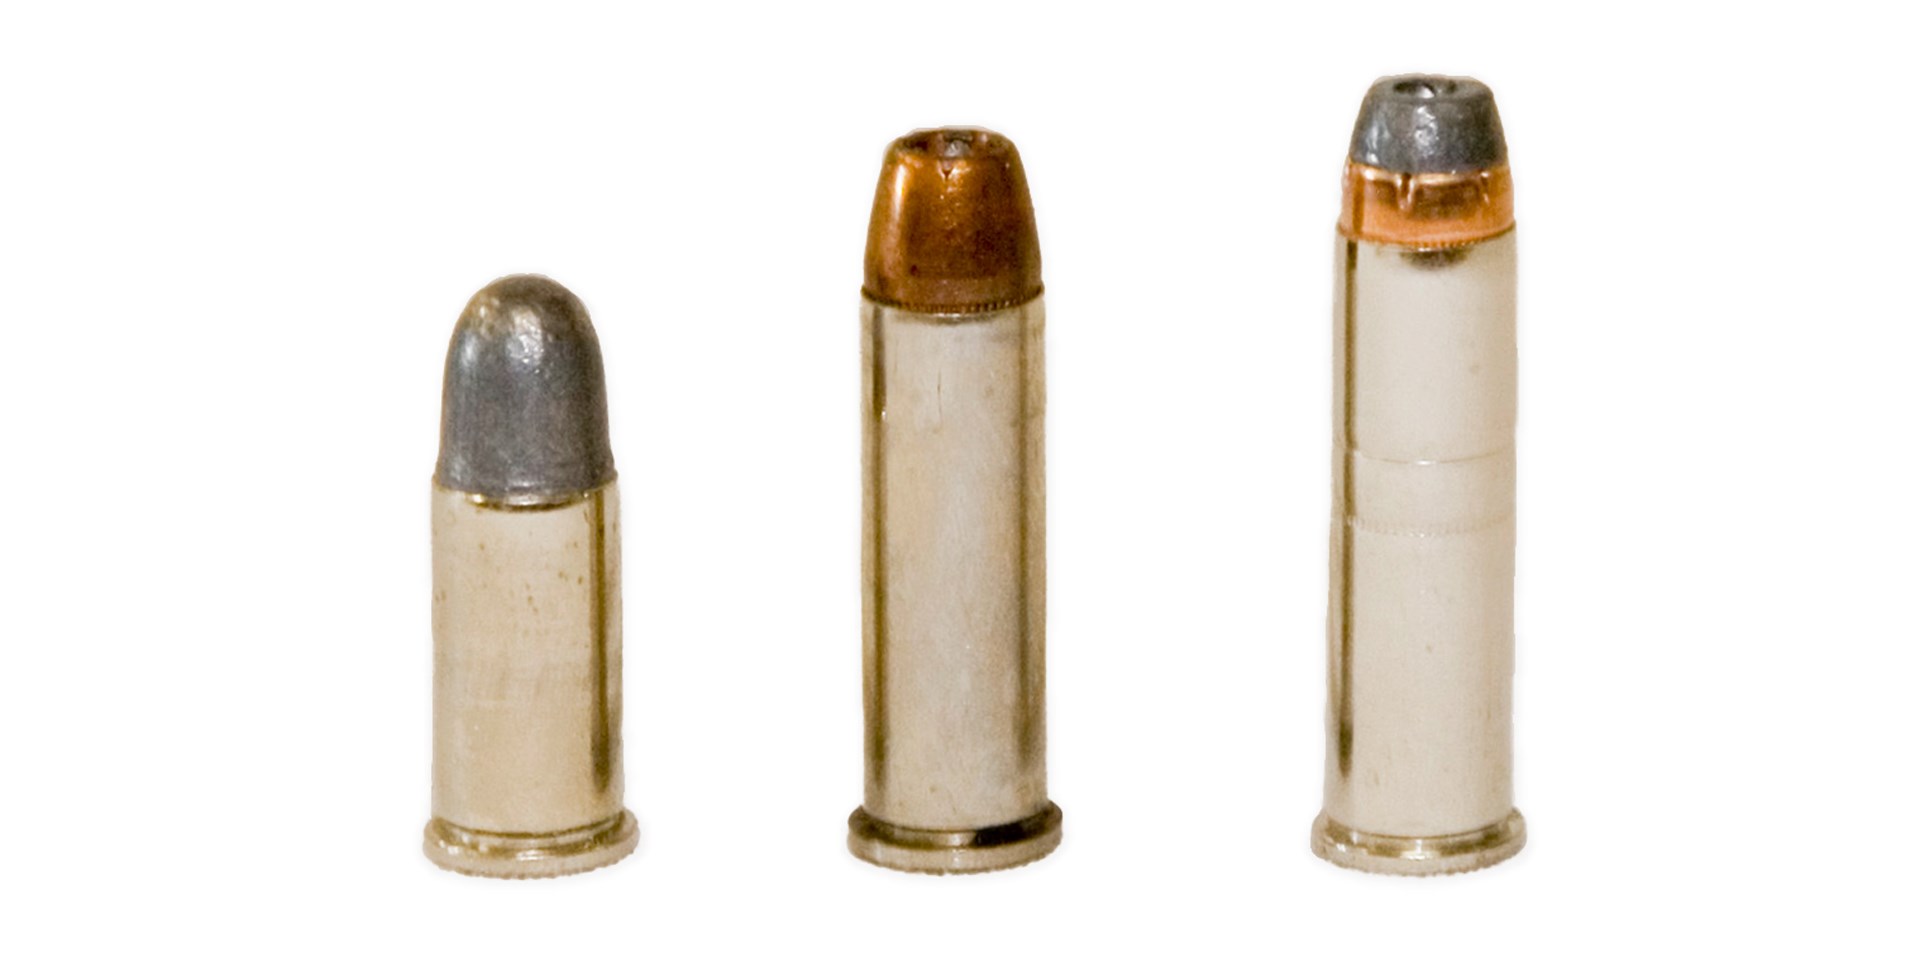 Ammunition comparison side by side picket fence three vertical bullets